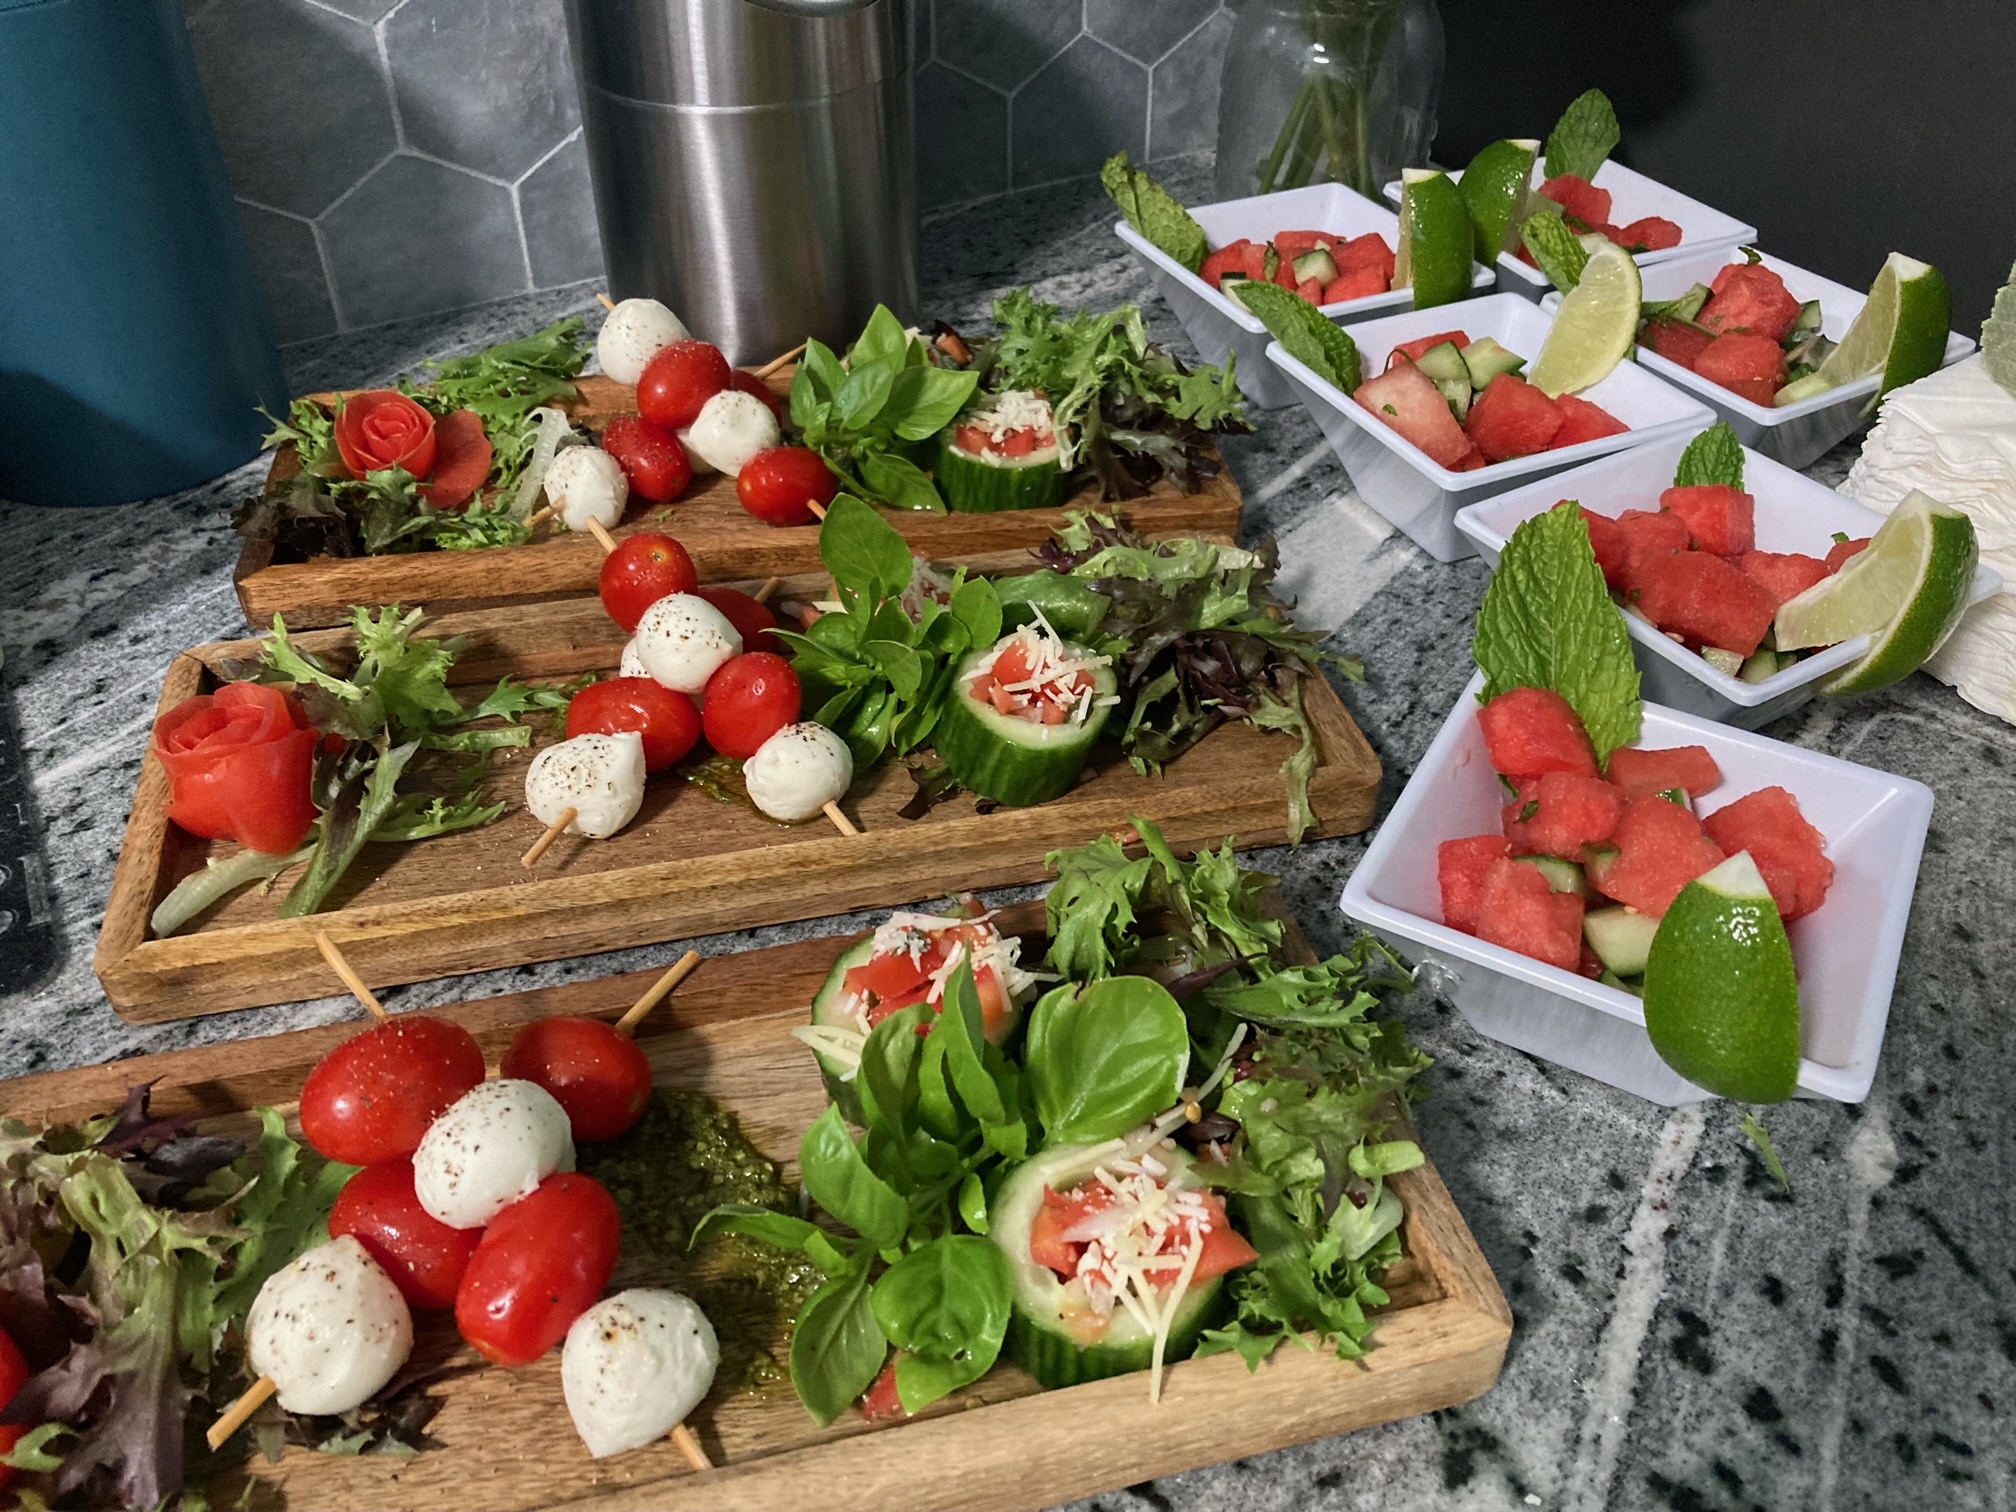 private home catering appetizers and salad